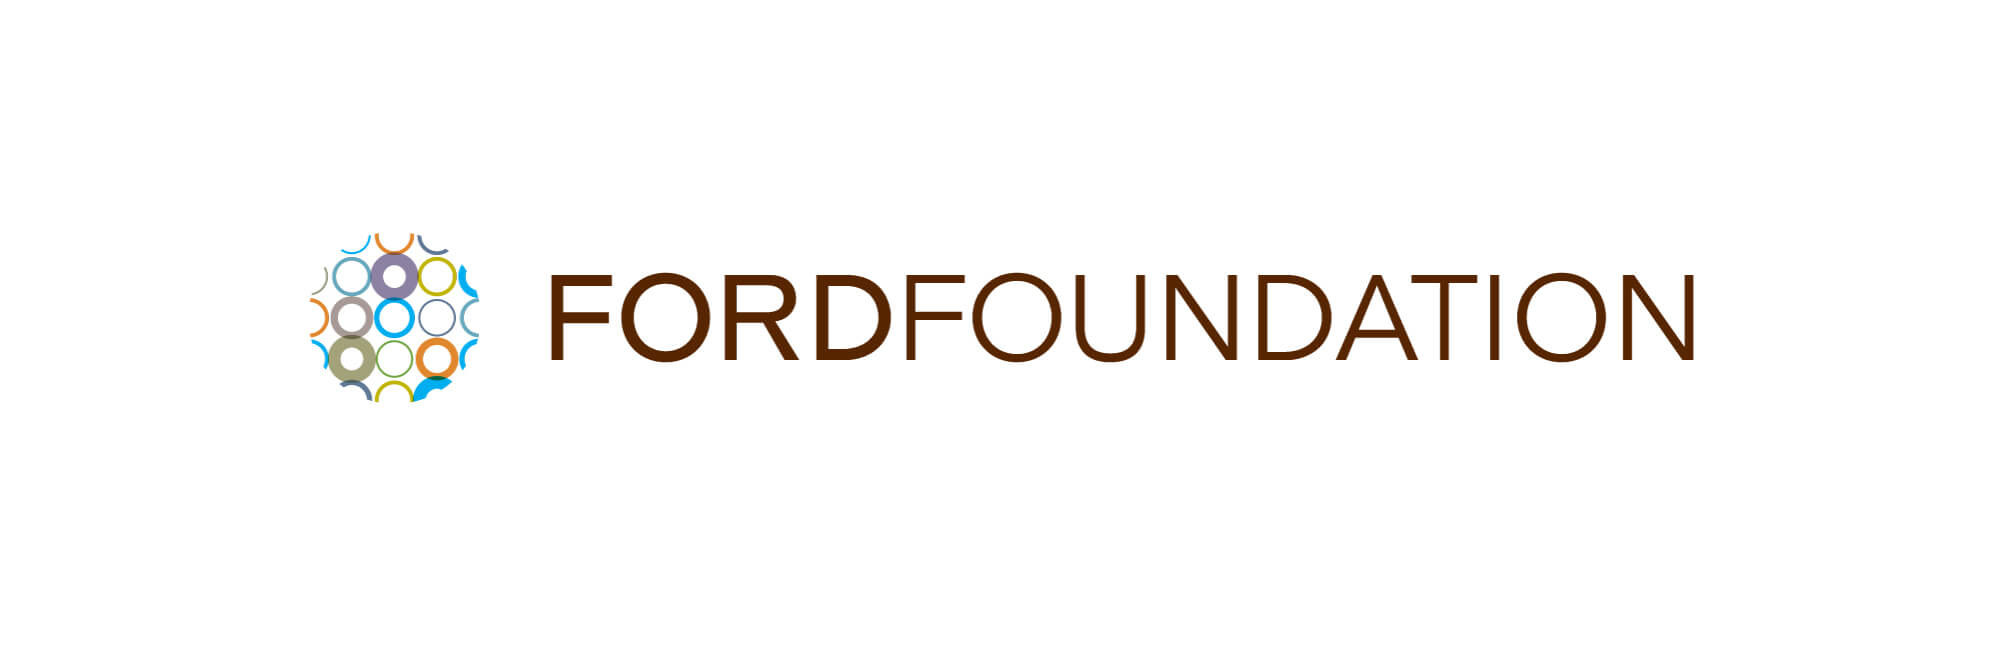 Ford foundation org grants #8